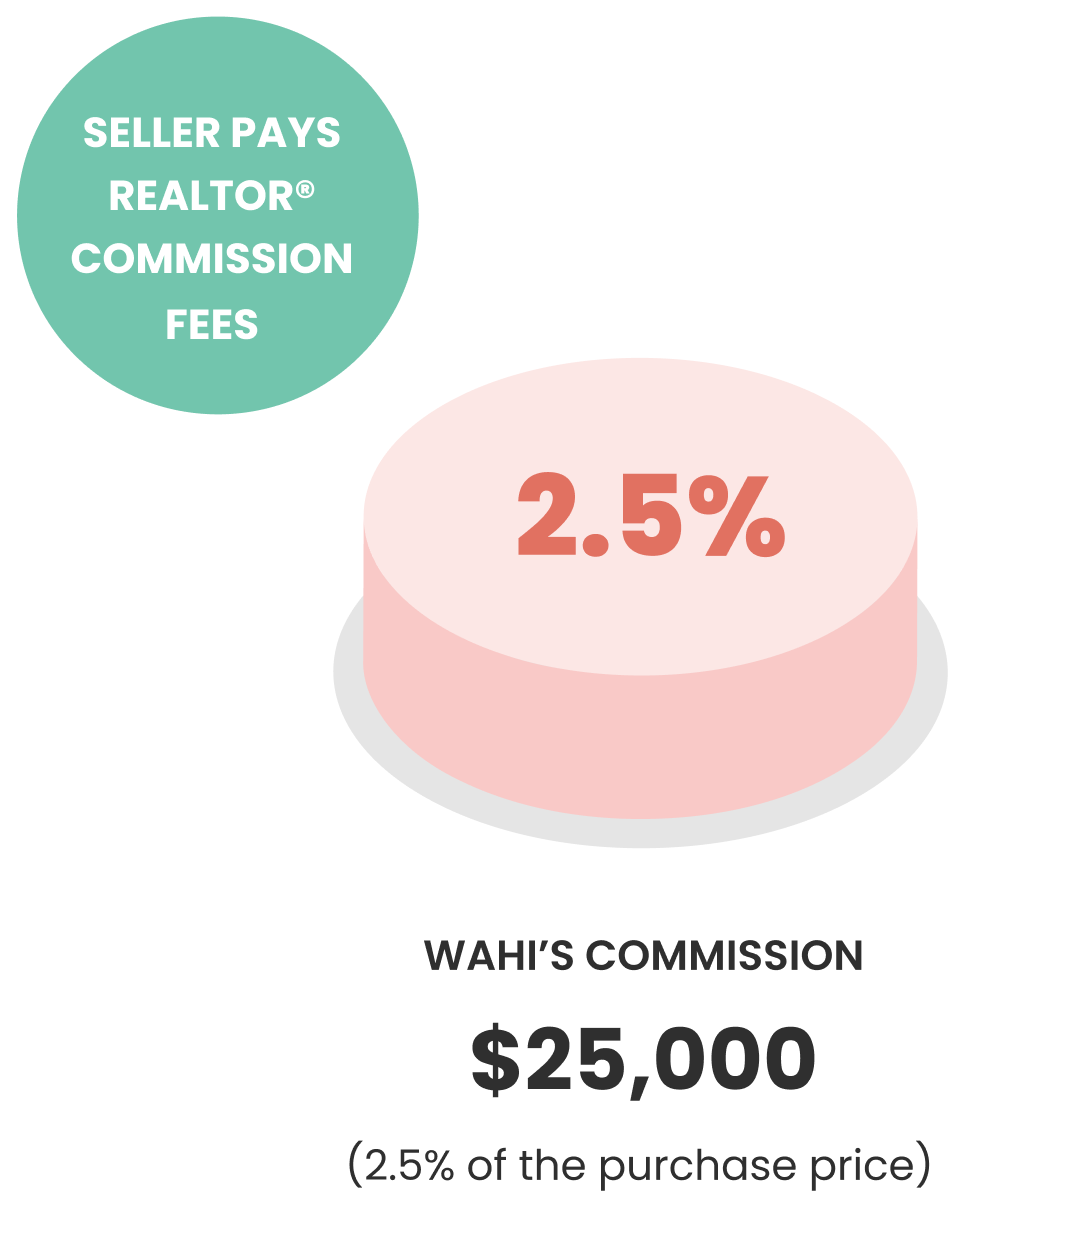 Seller pays Realtor® commission fees